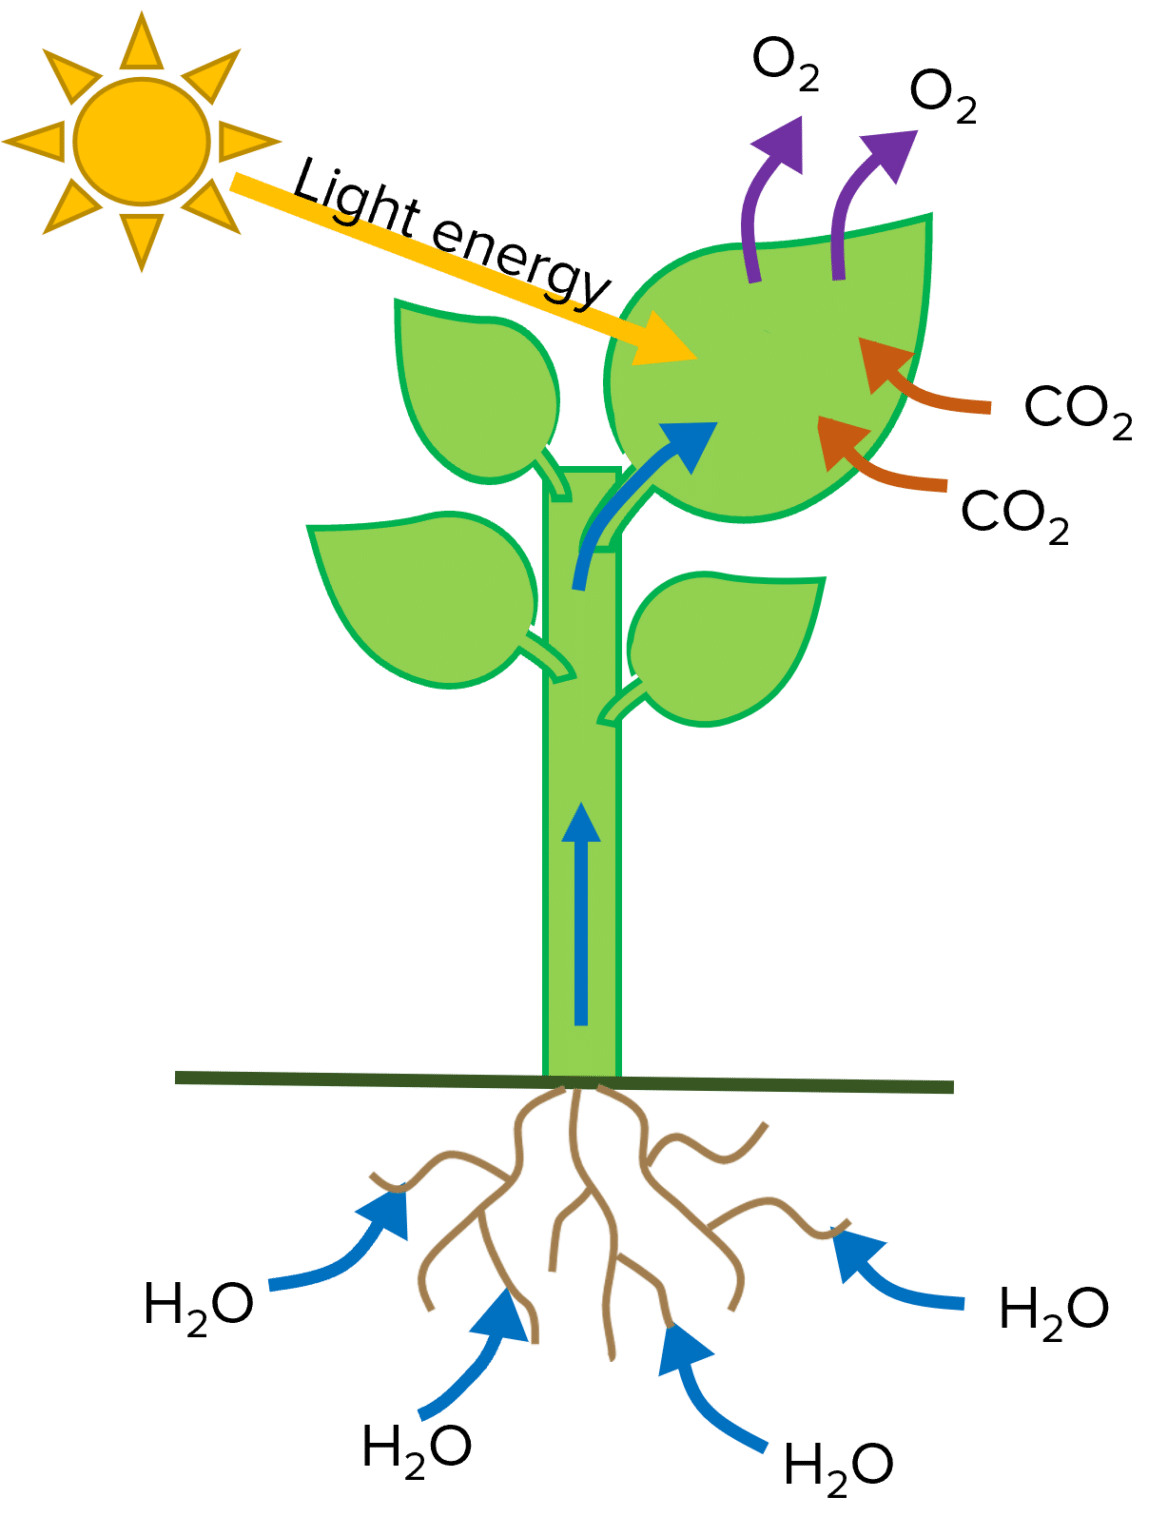 Photosynthesis Questions And Revision Mme